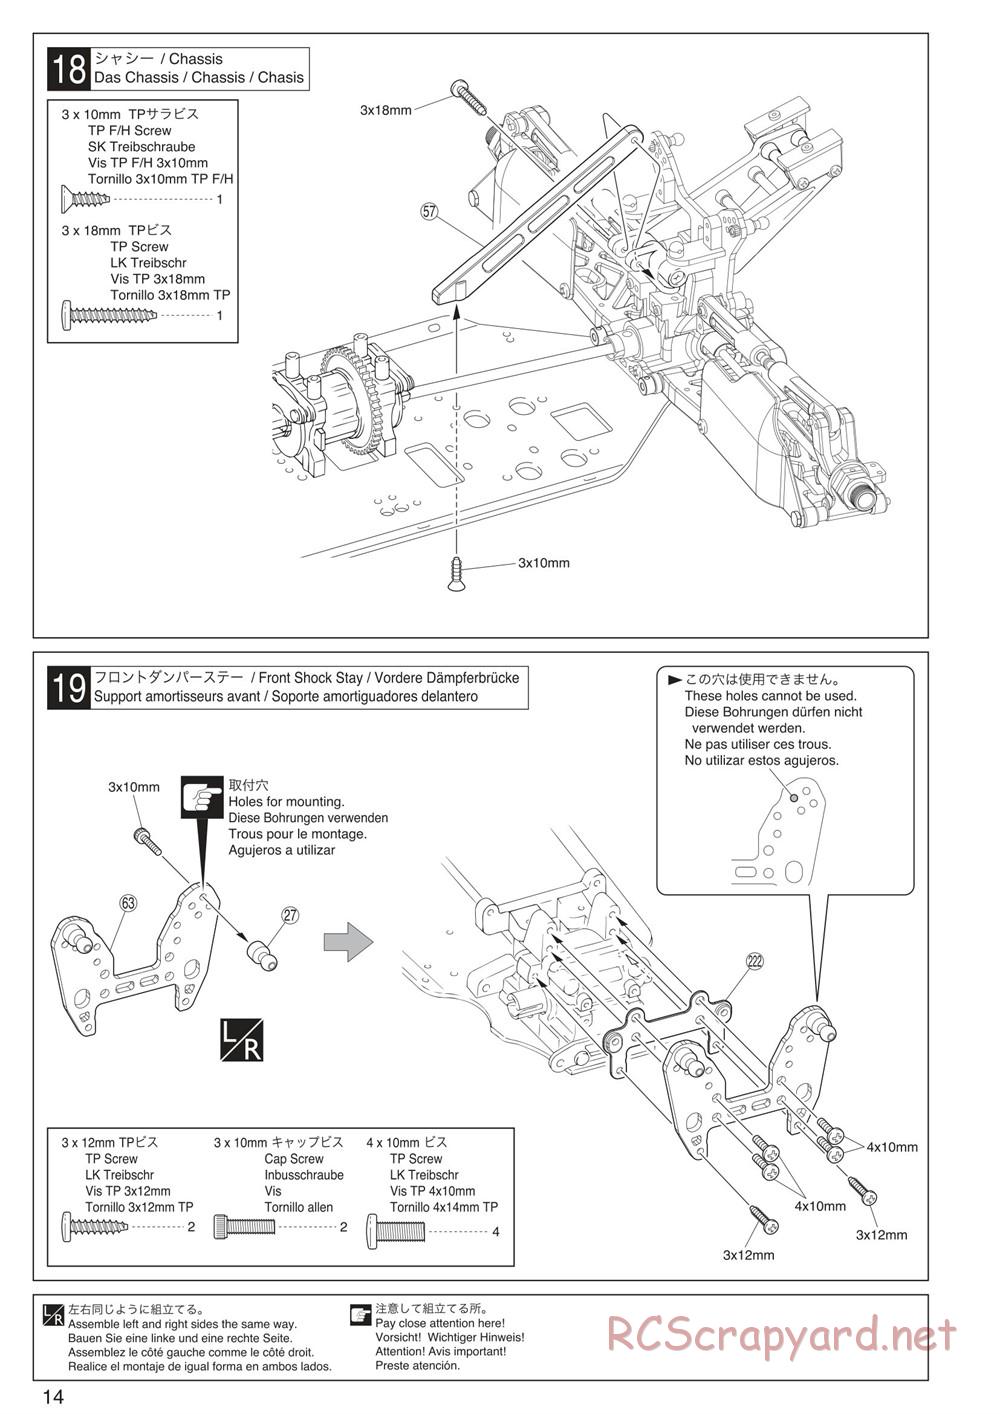 Kyosho - Inferno Neo ST 3.0 - Manual - Page 14